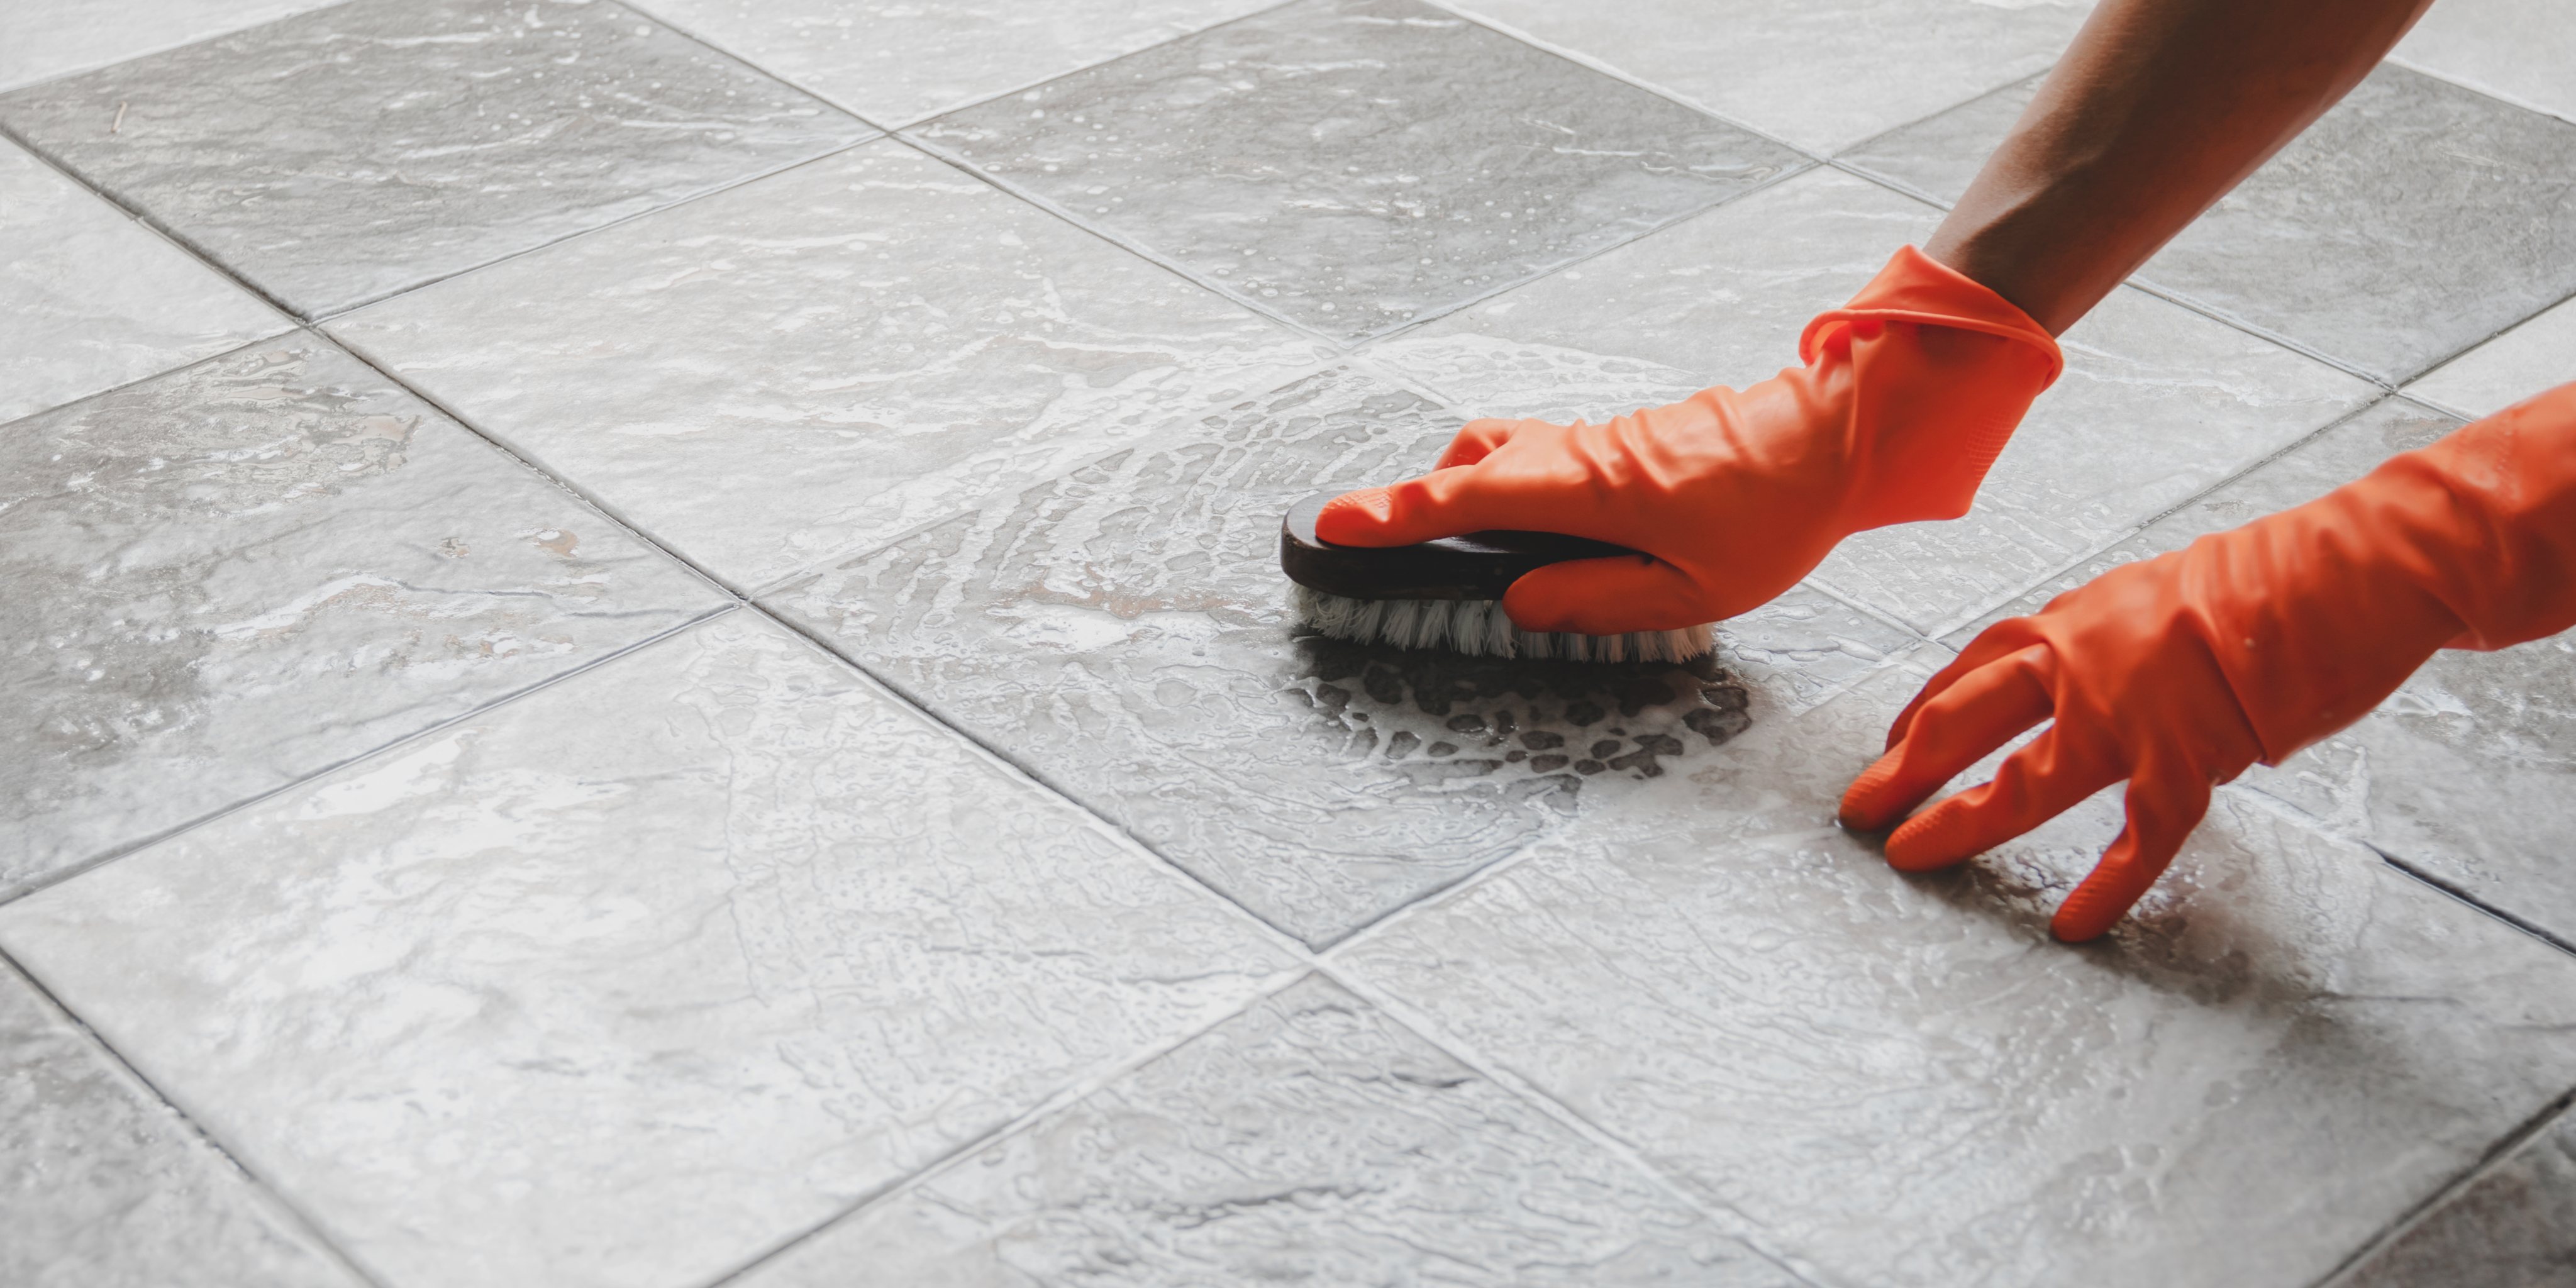 Cropped hands cleaning tiled floor